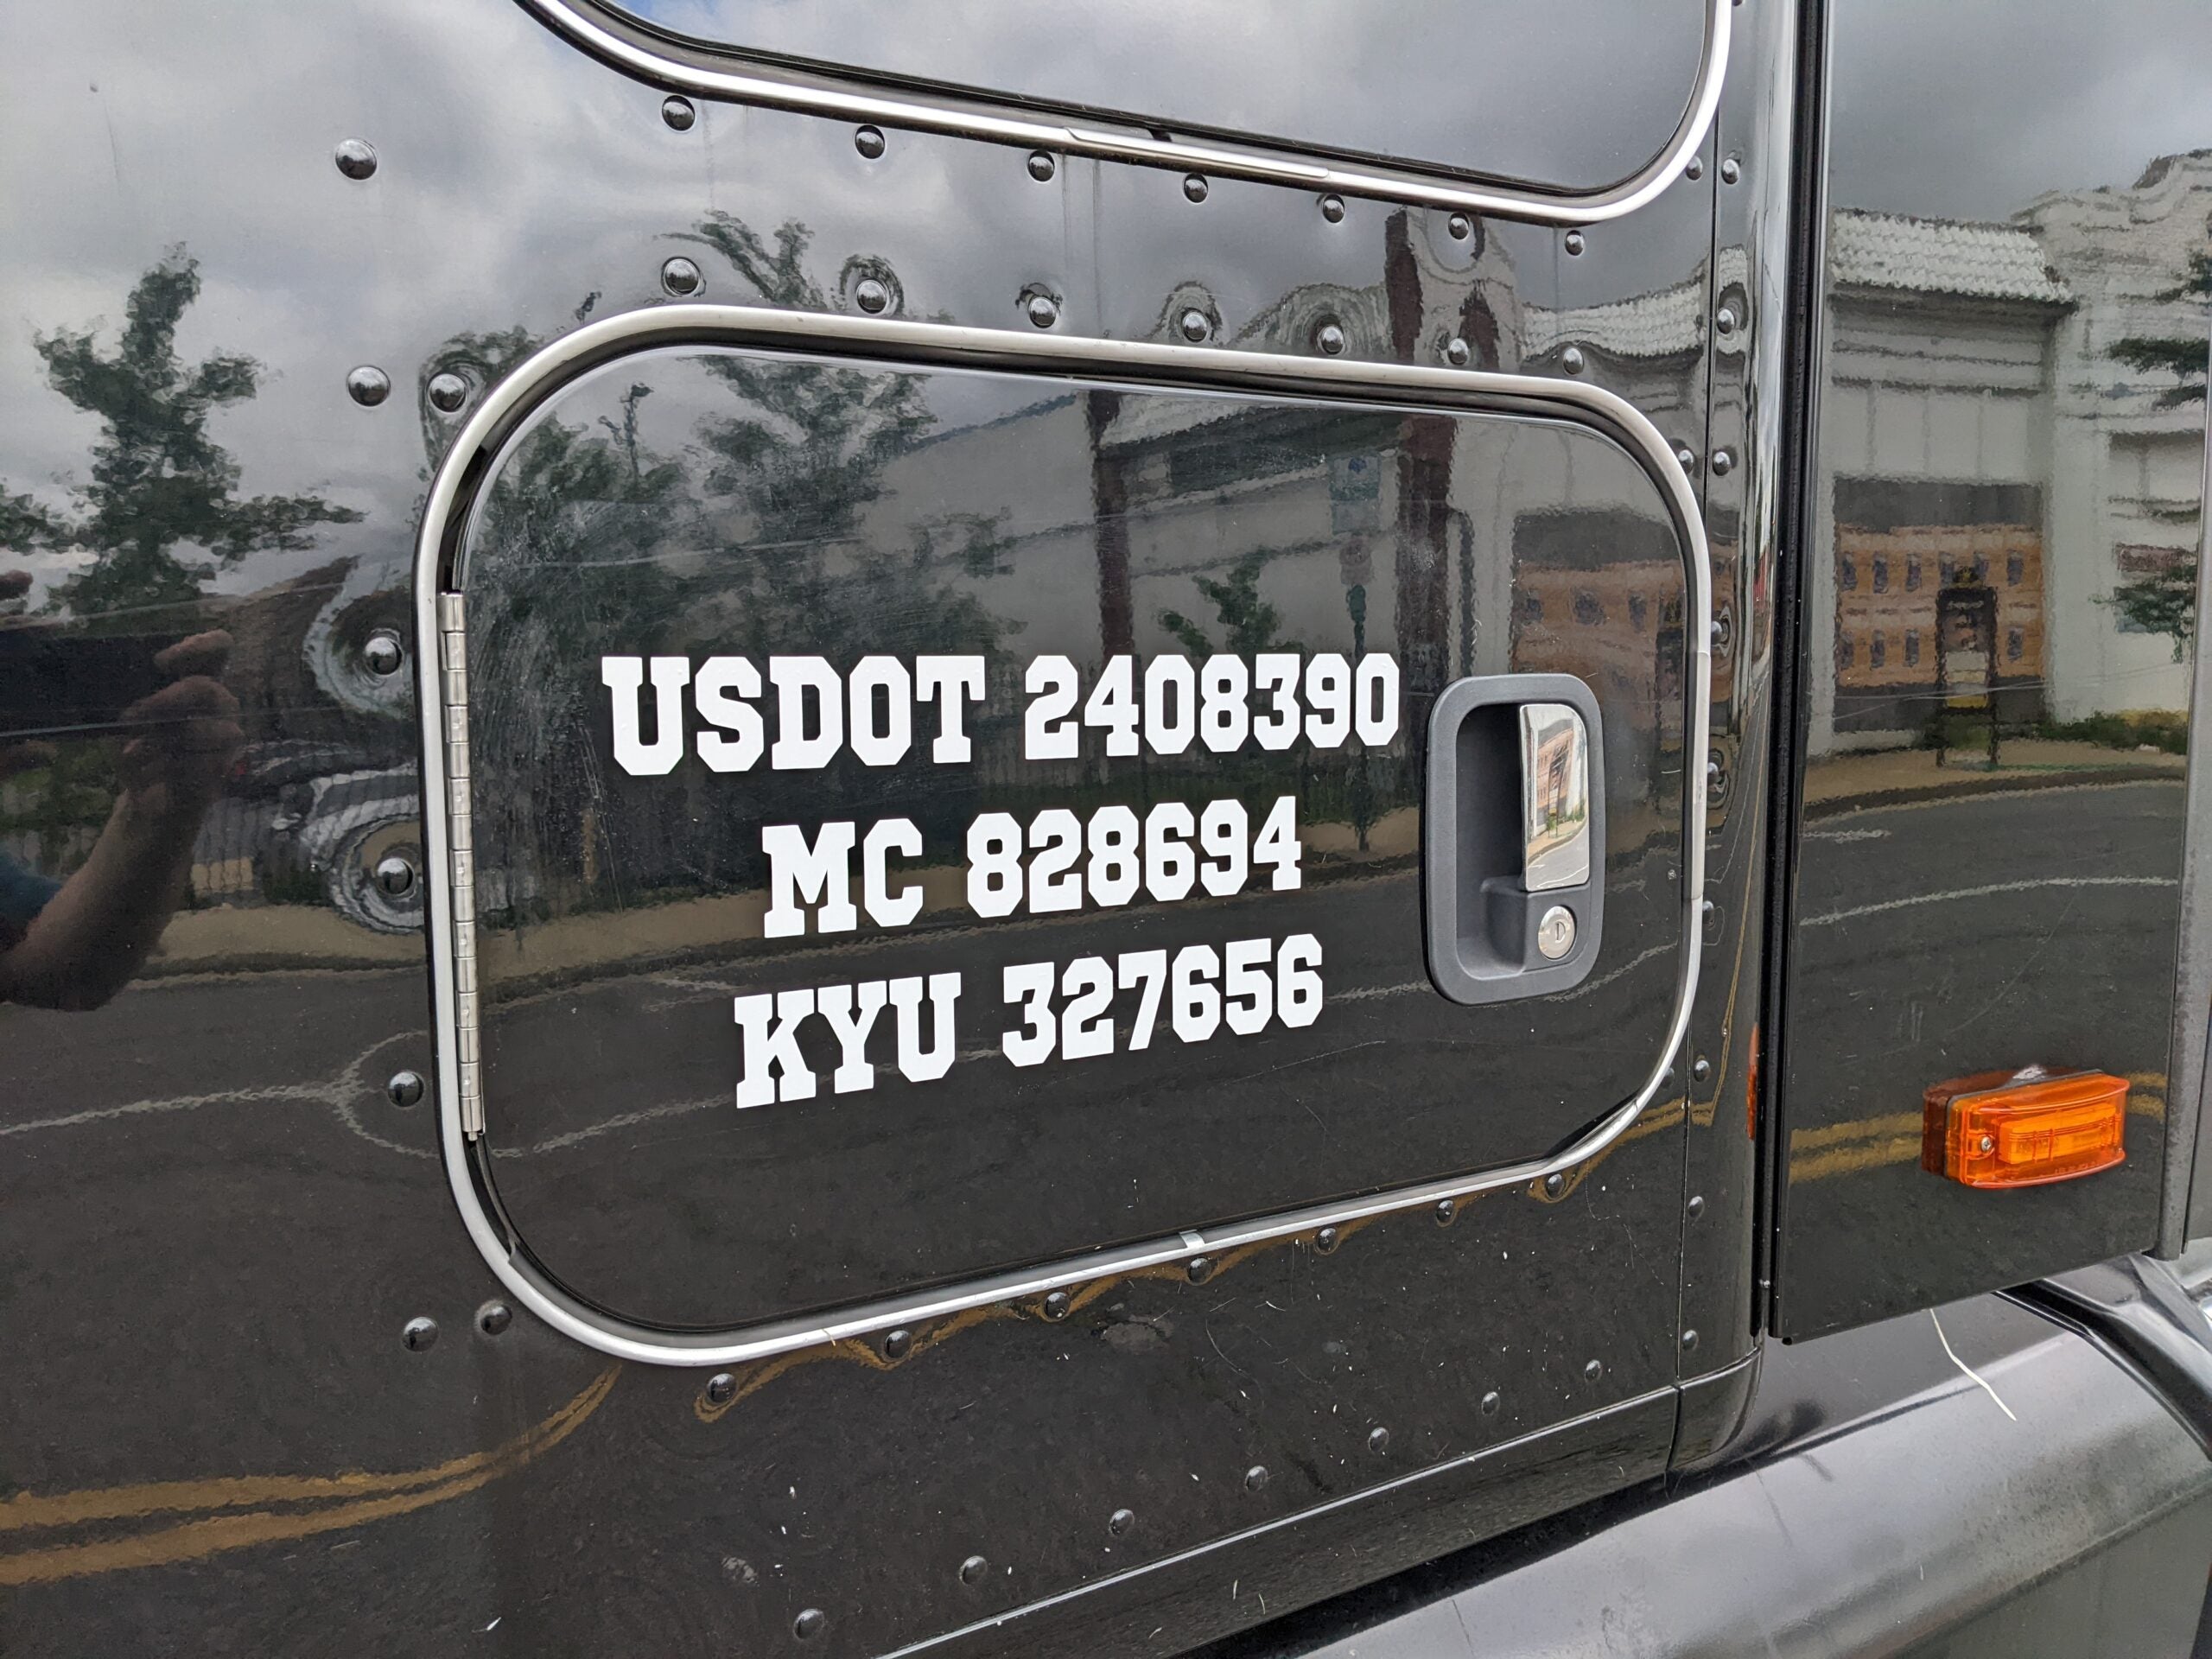 usdot mc kyu number decal sticker lettering